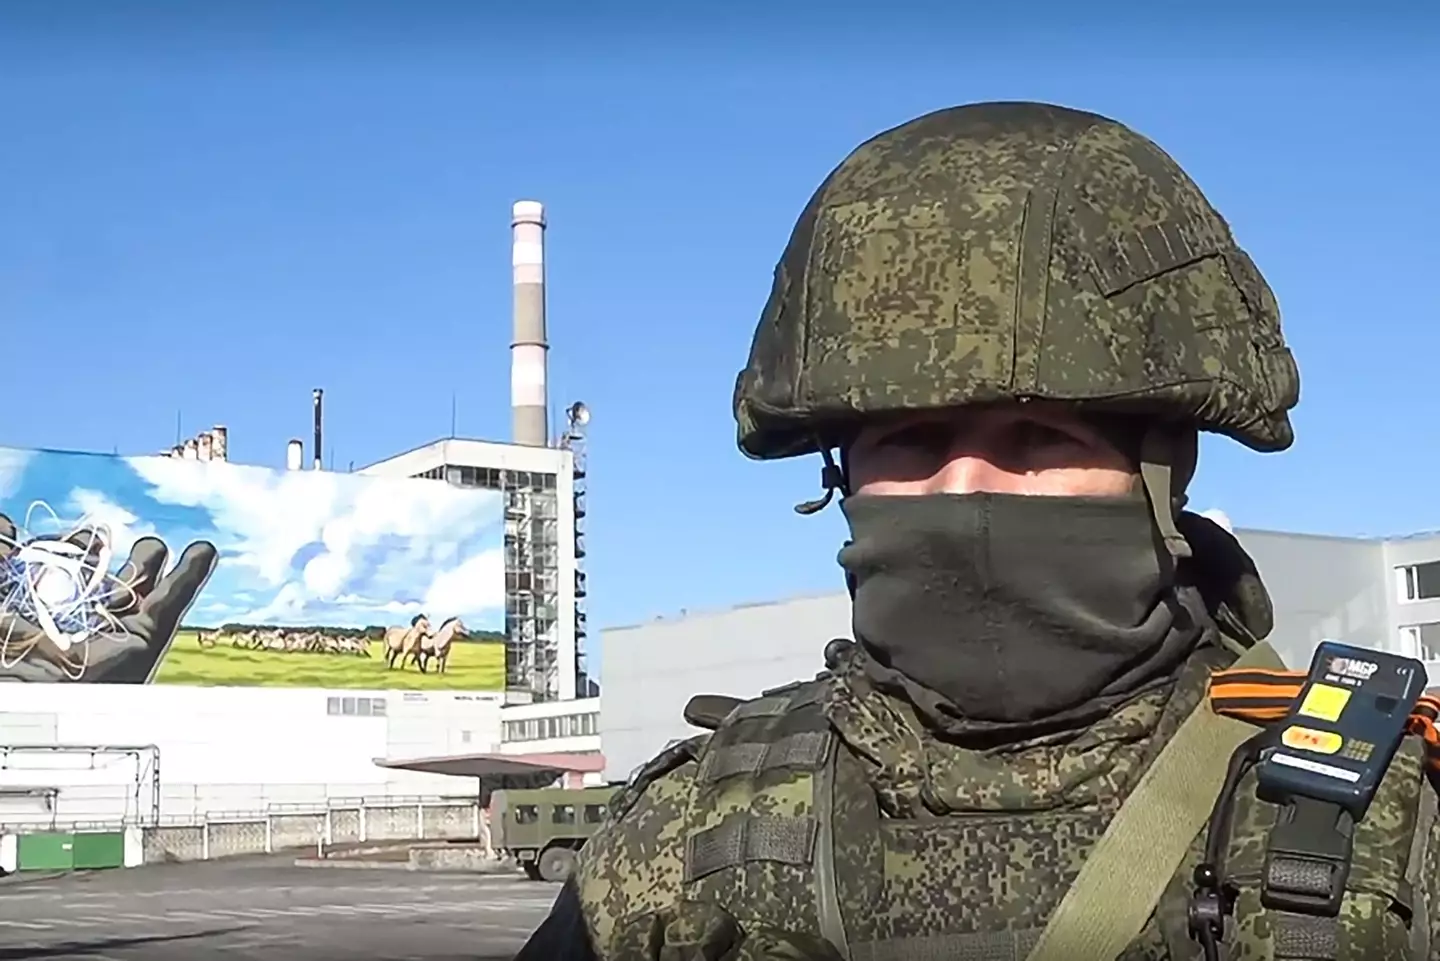 A soldier at the Chernobyl Nuclear Plant.